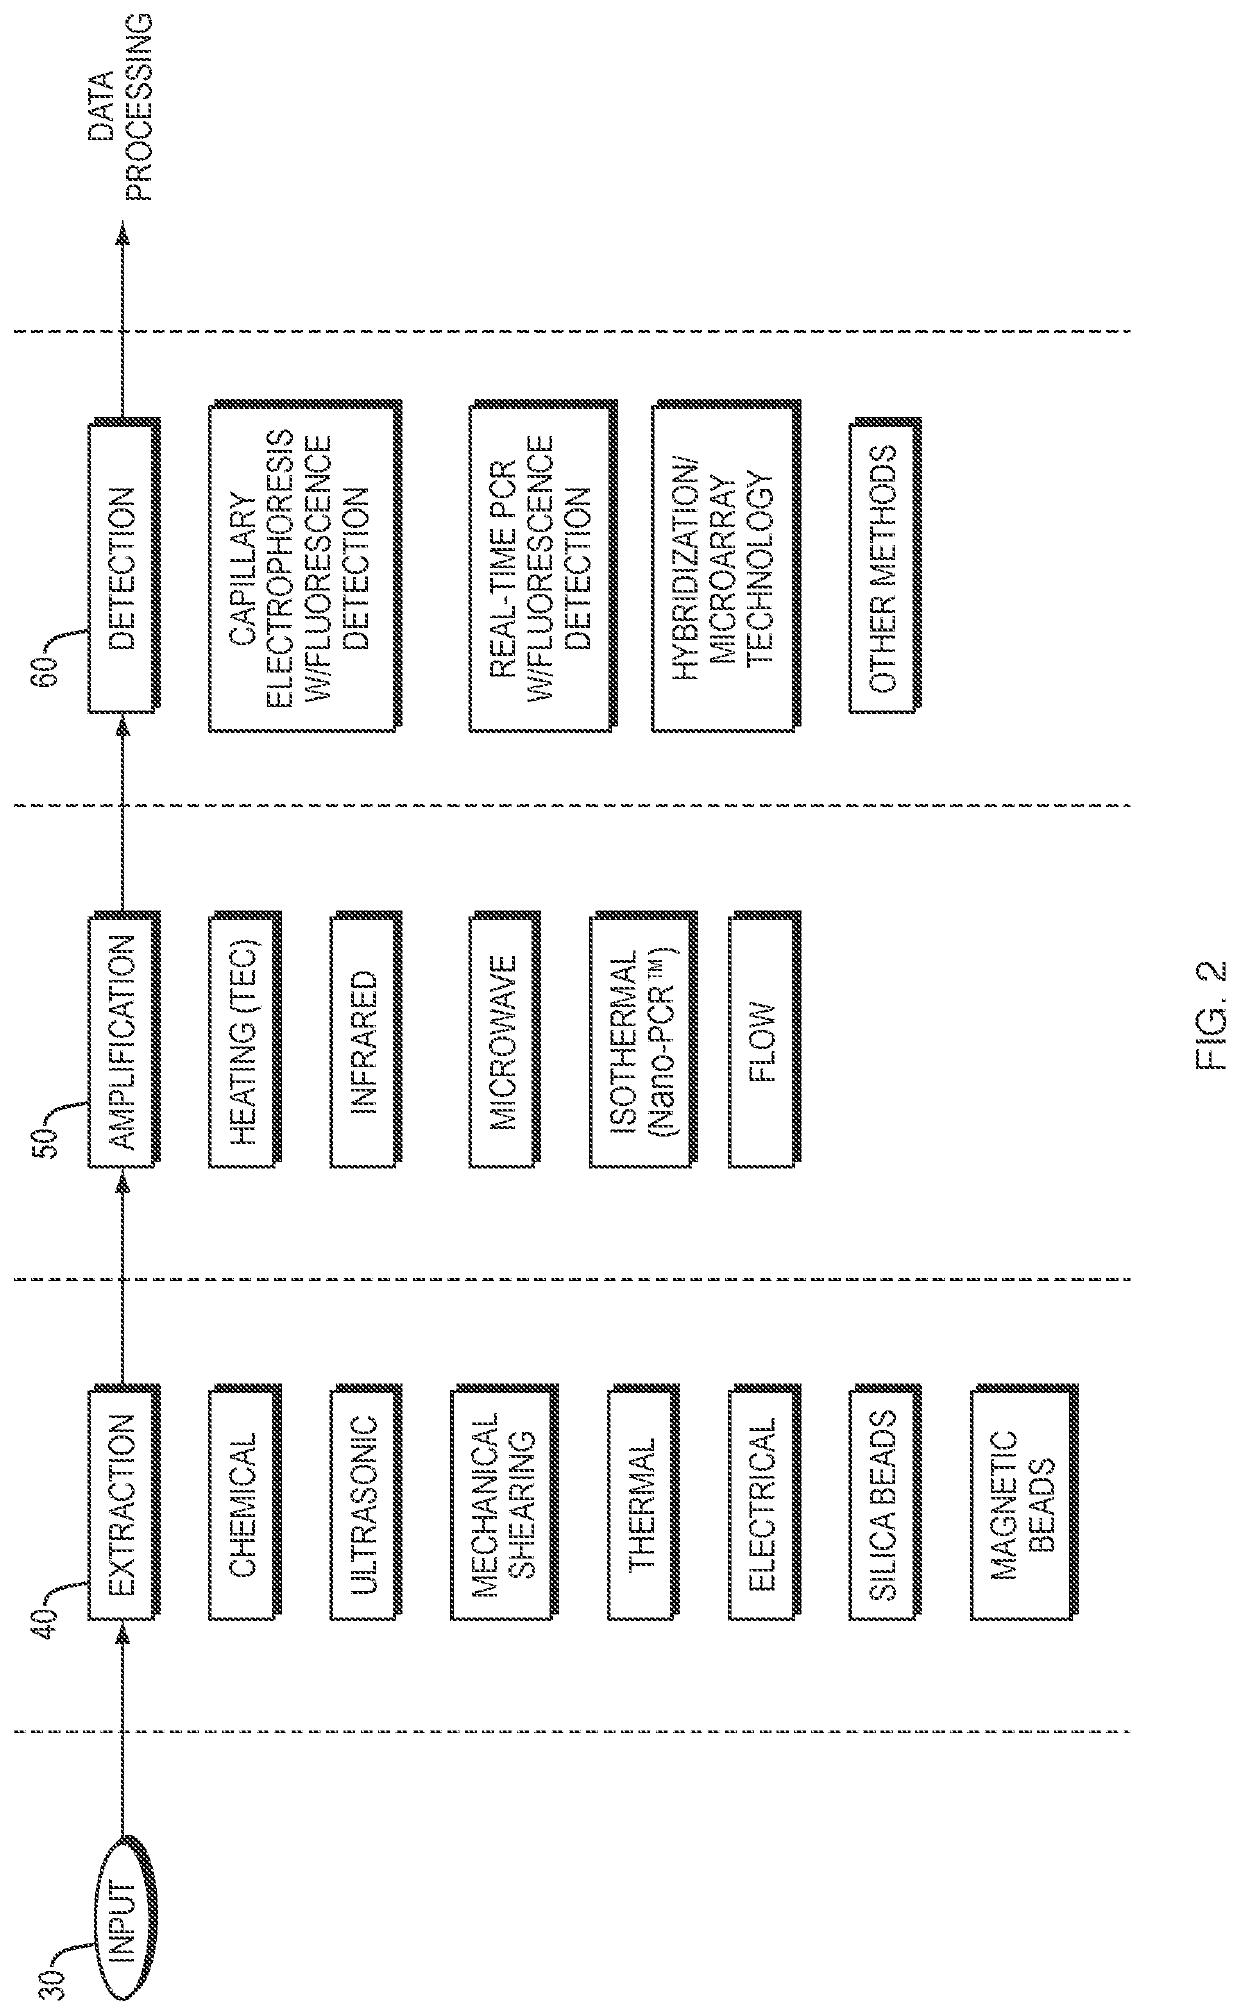 Systems and Methods for Mobile Device Analysis of Nucleic Acids and Proteins